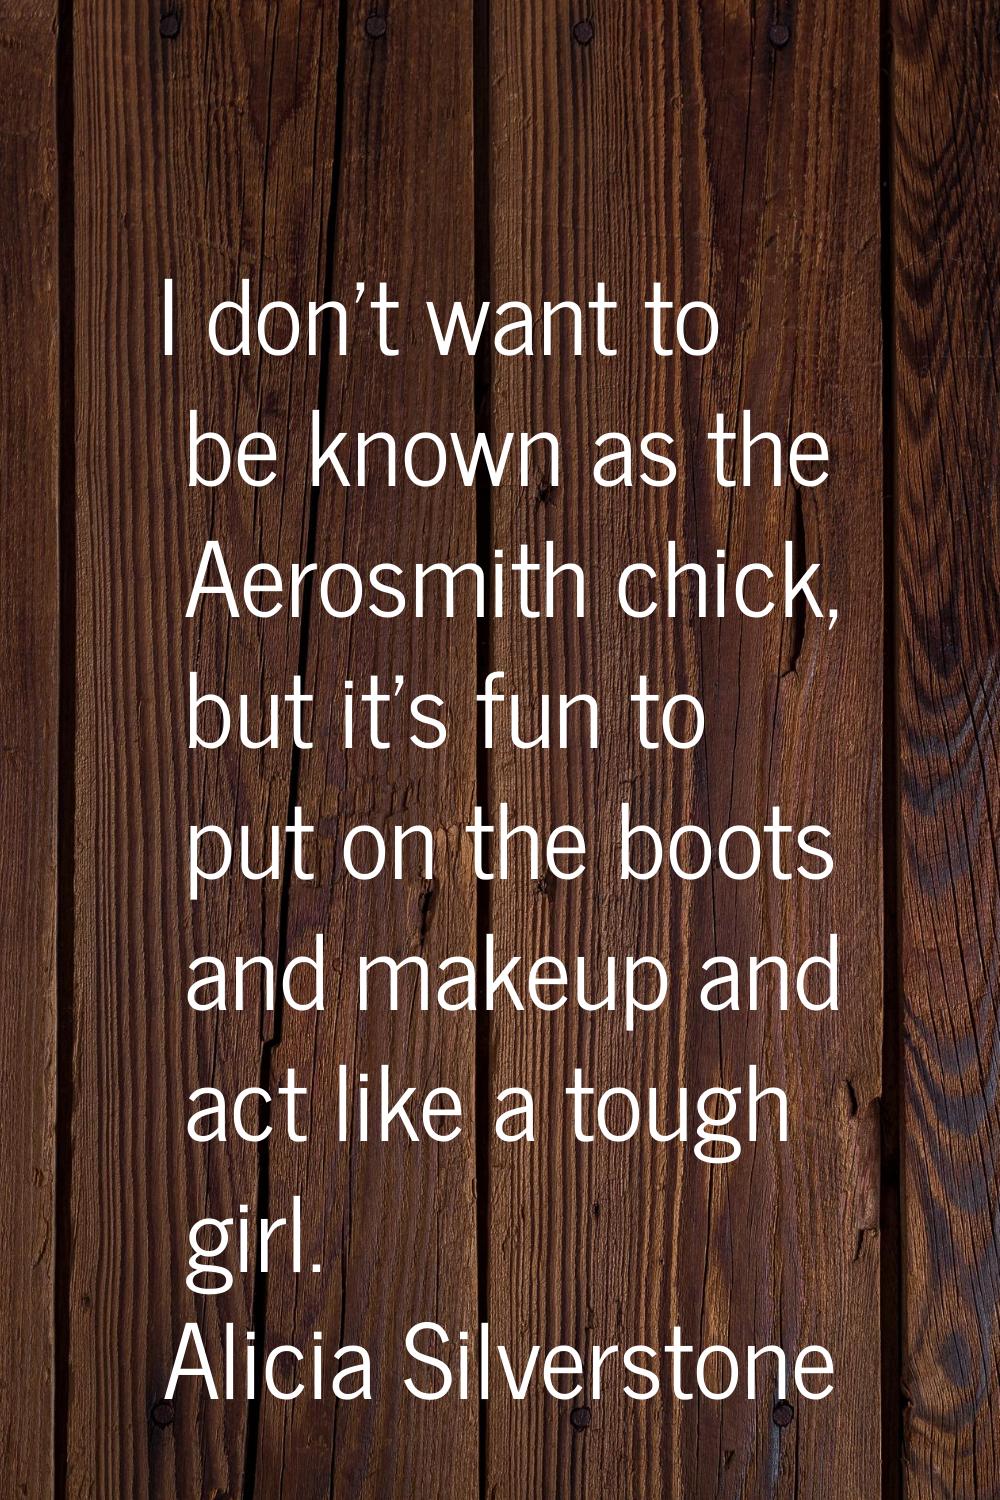 I don't want to be known as the Aerosmith chick, but it's fun to put on the boots and makeup and ac